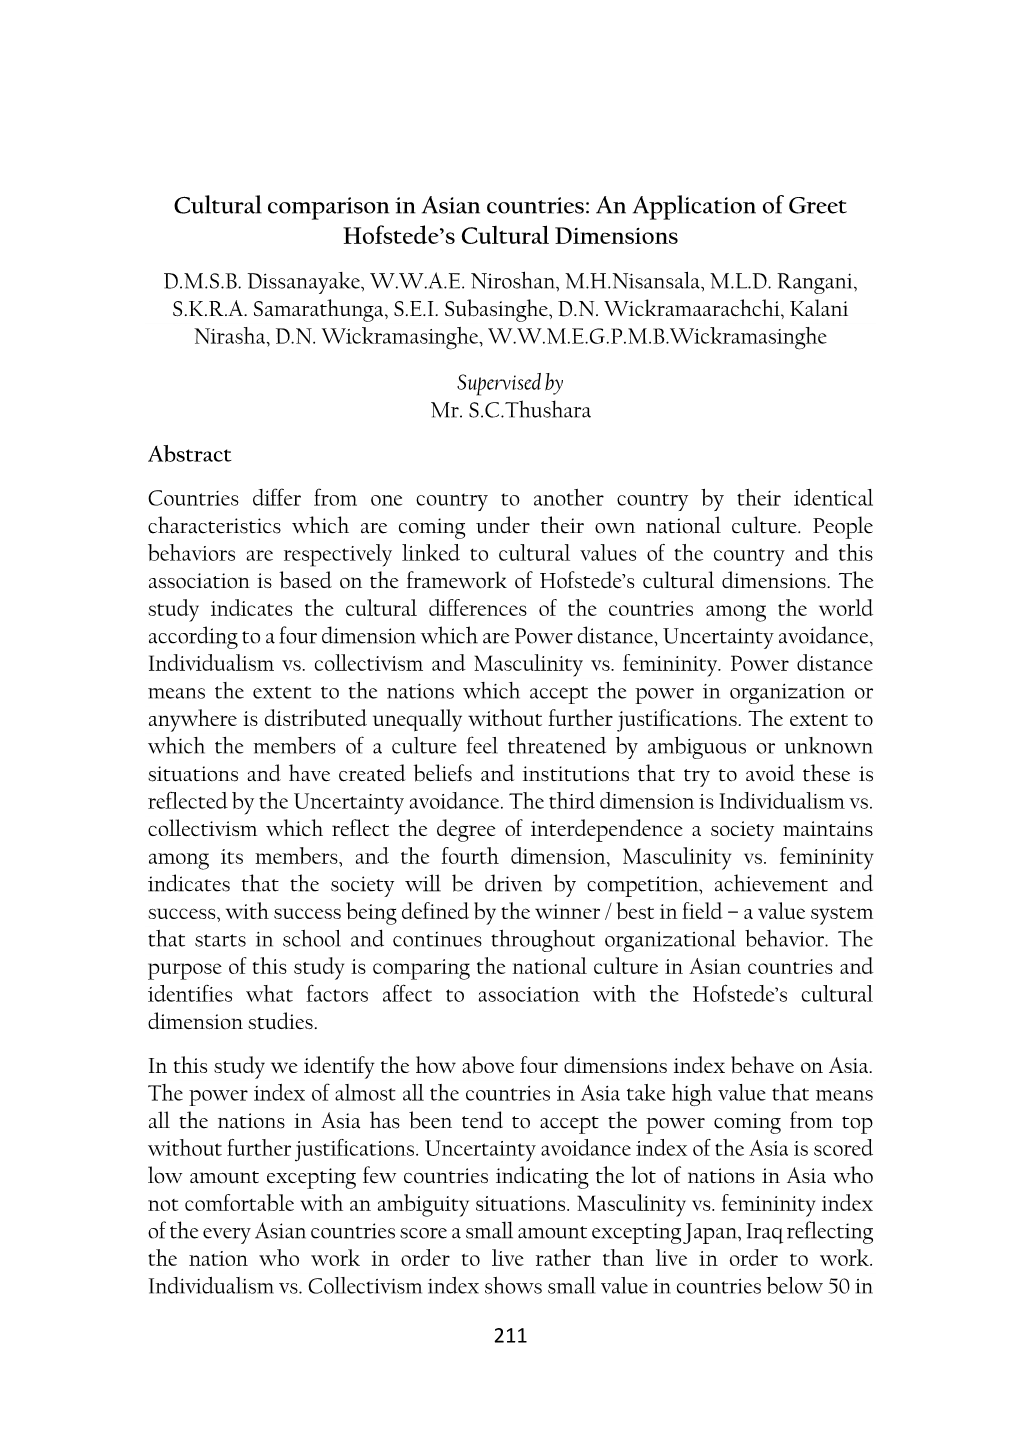 Cultural Comparison in Asian Countries: an Application of Greet Hofstede’S Cultural Dimensions D.M.S.B